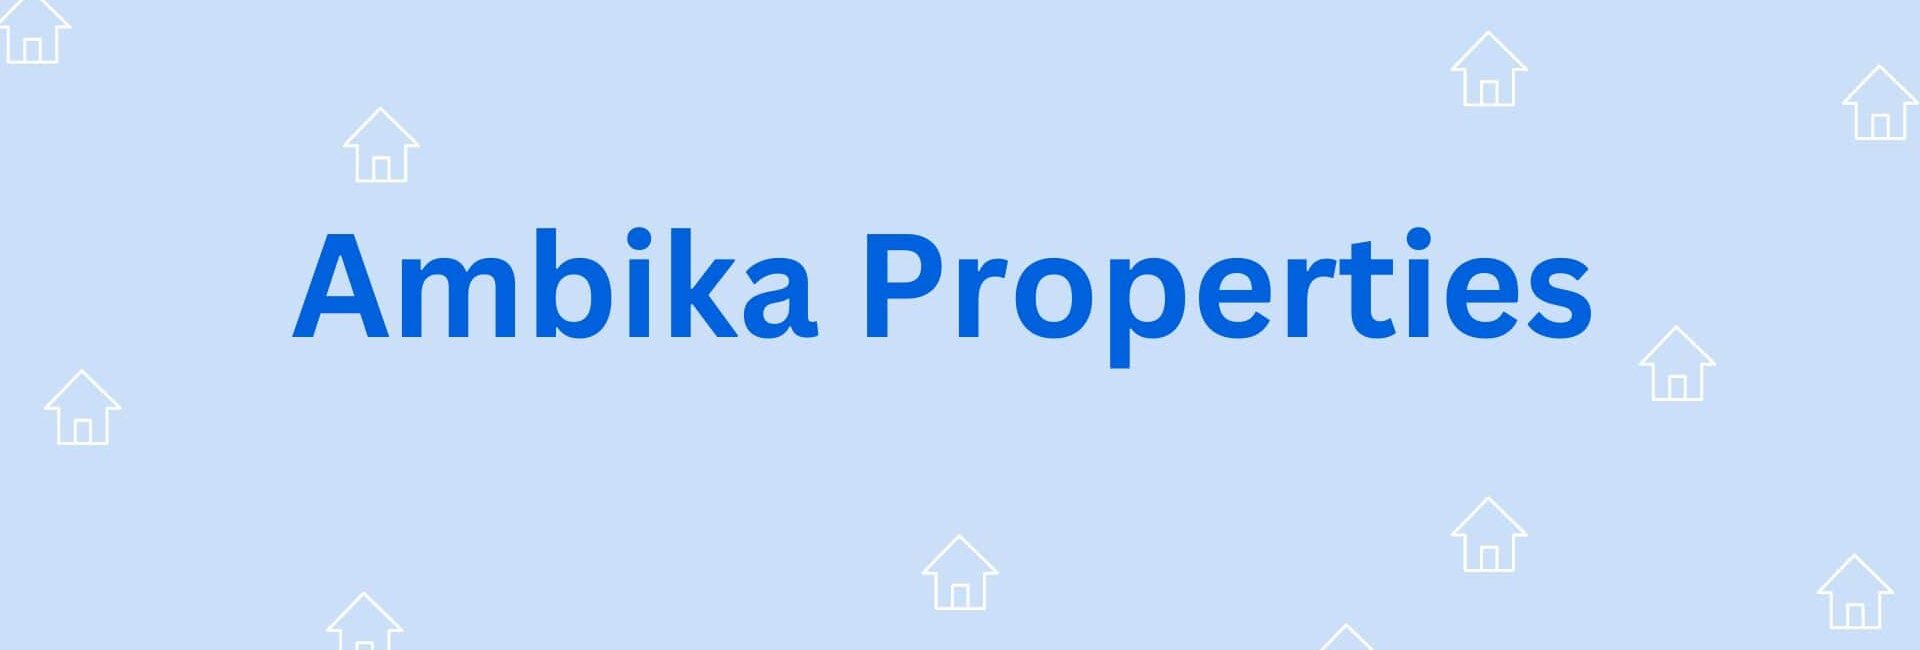 Ambika Properties - real estate agent in Hisar